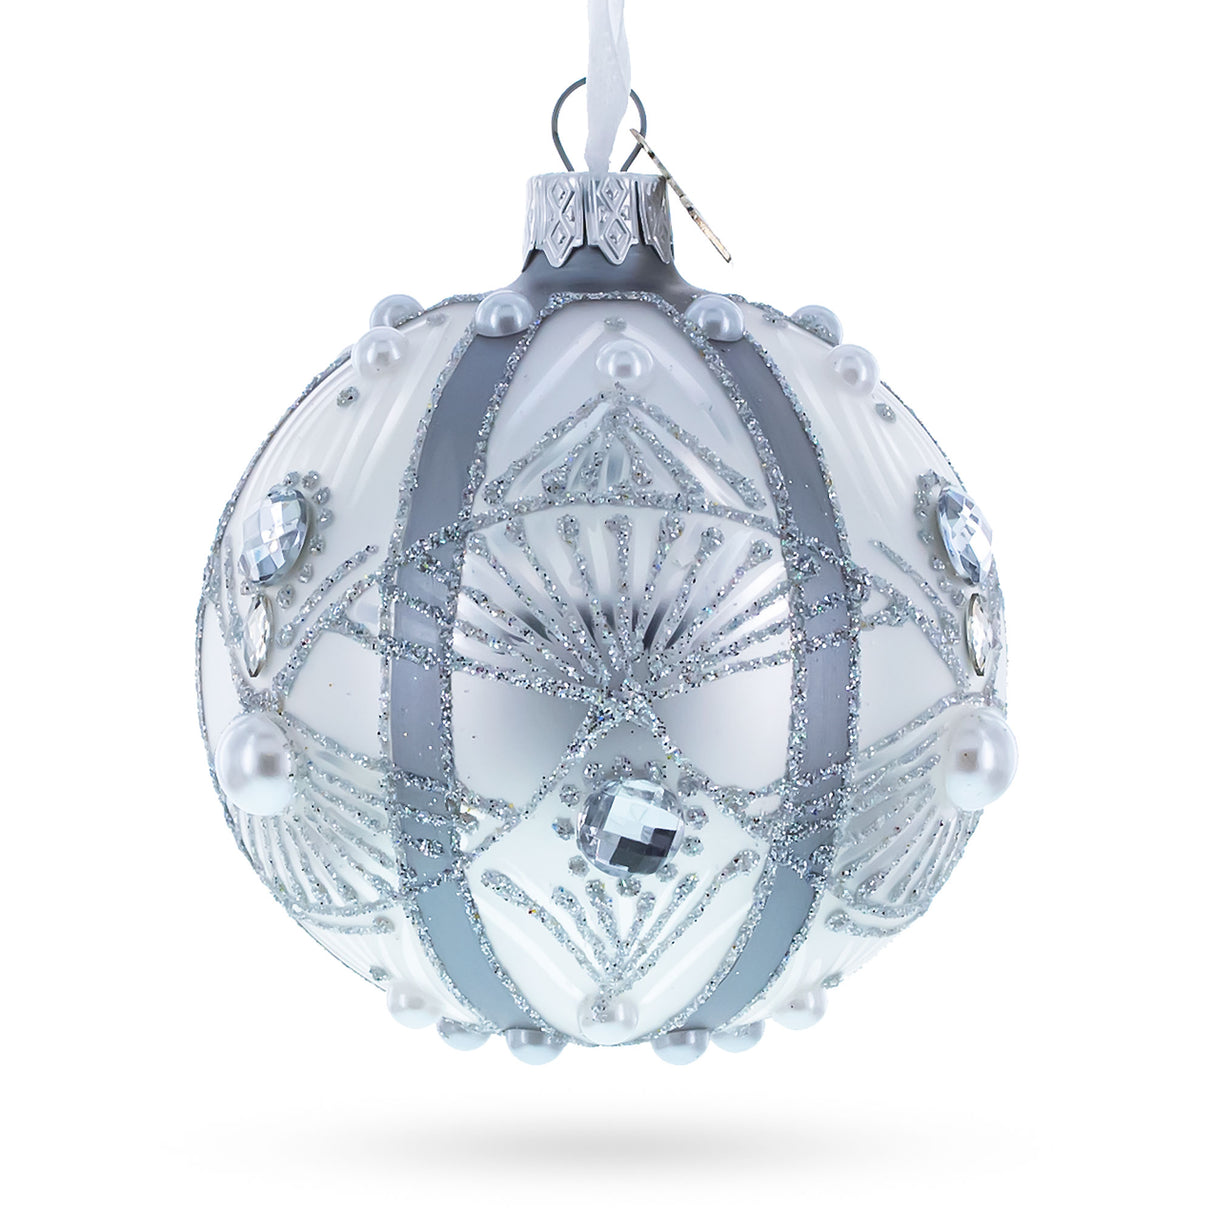 White Jewels on Silver Glass Ball Christmas Ornament in White color, Round shape